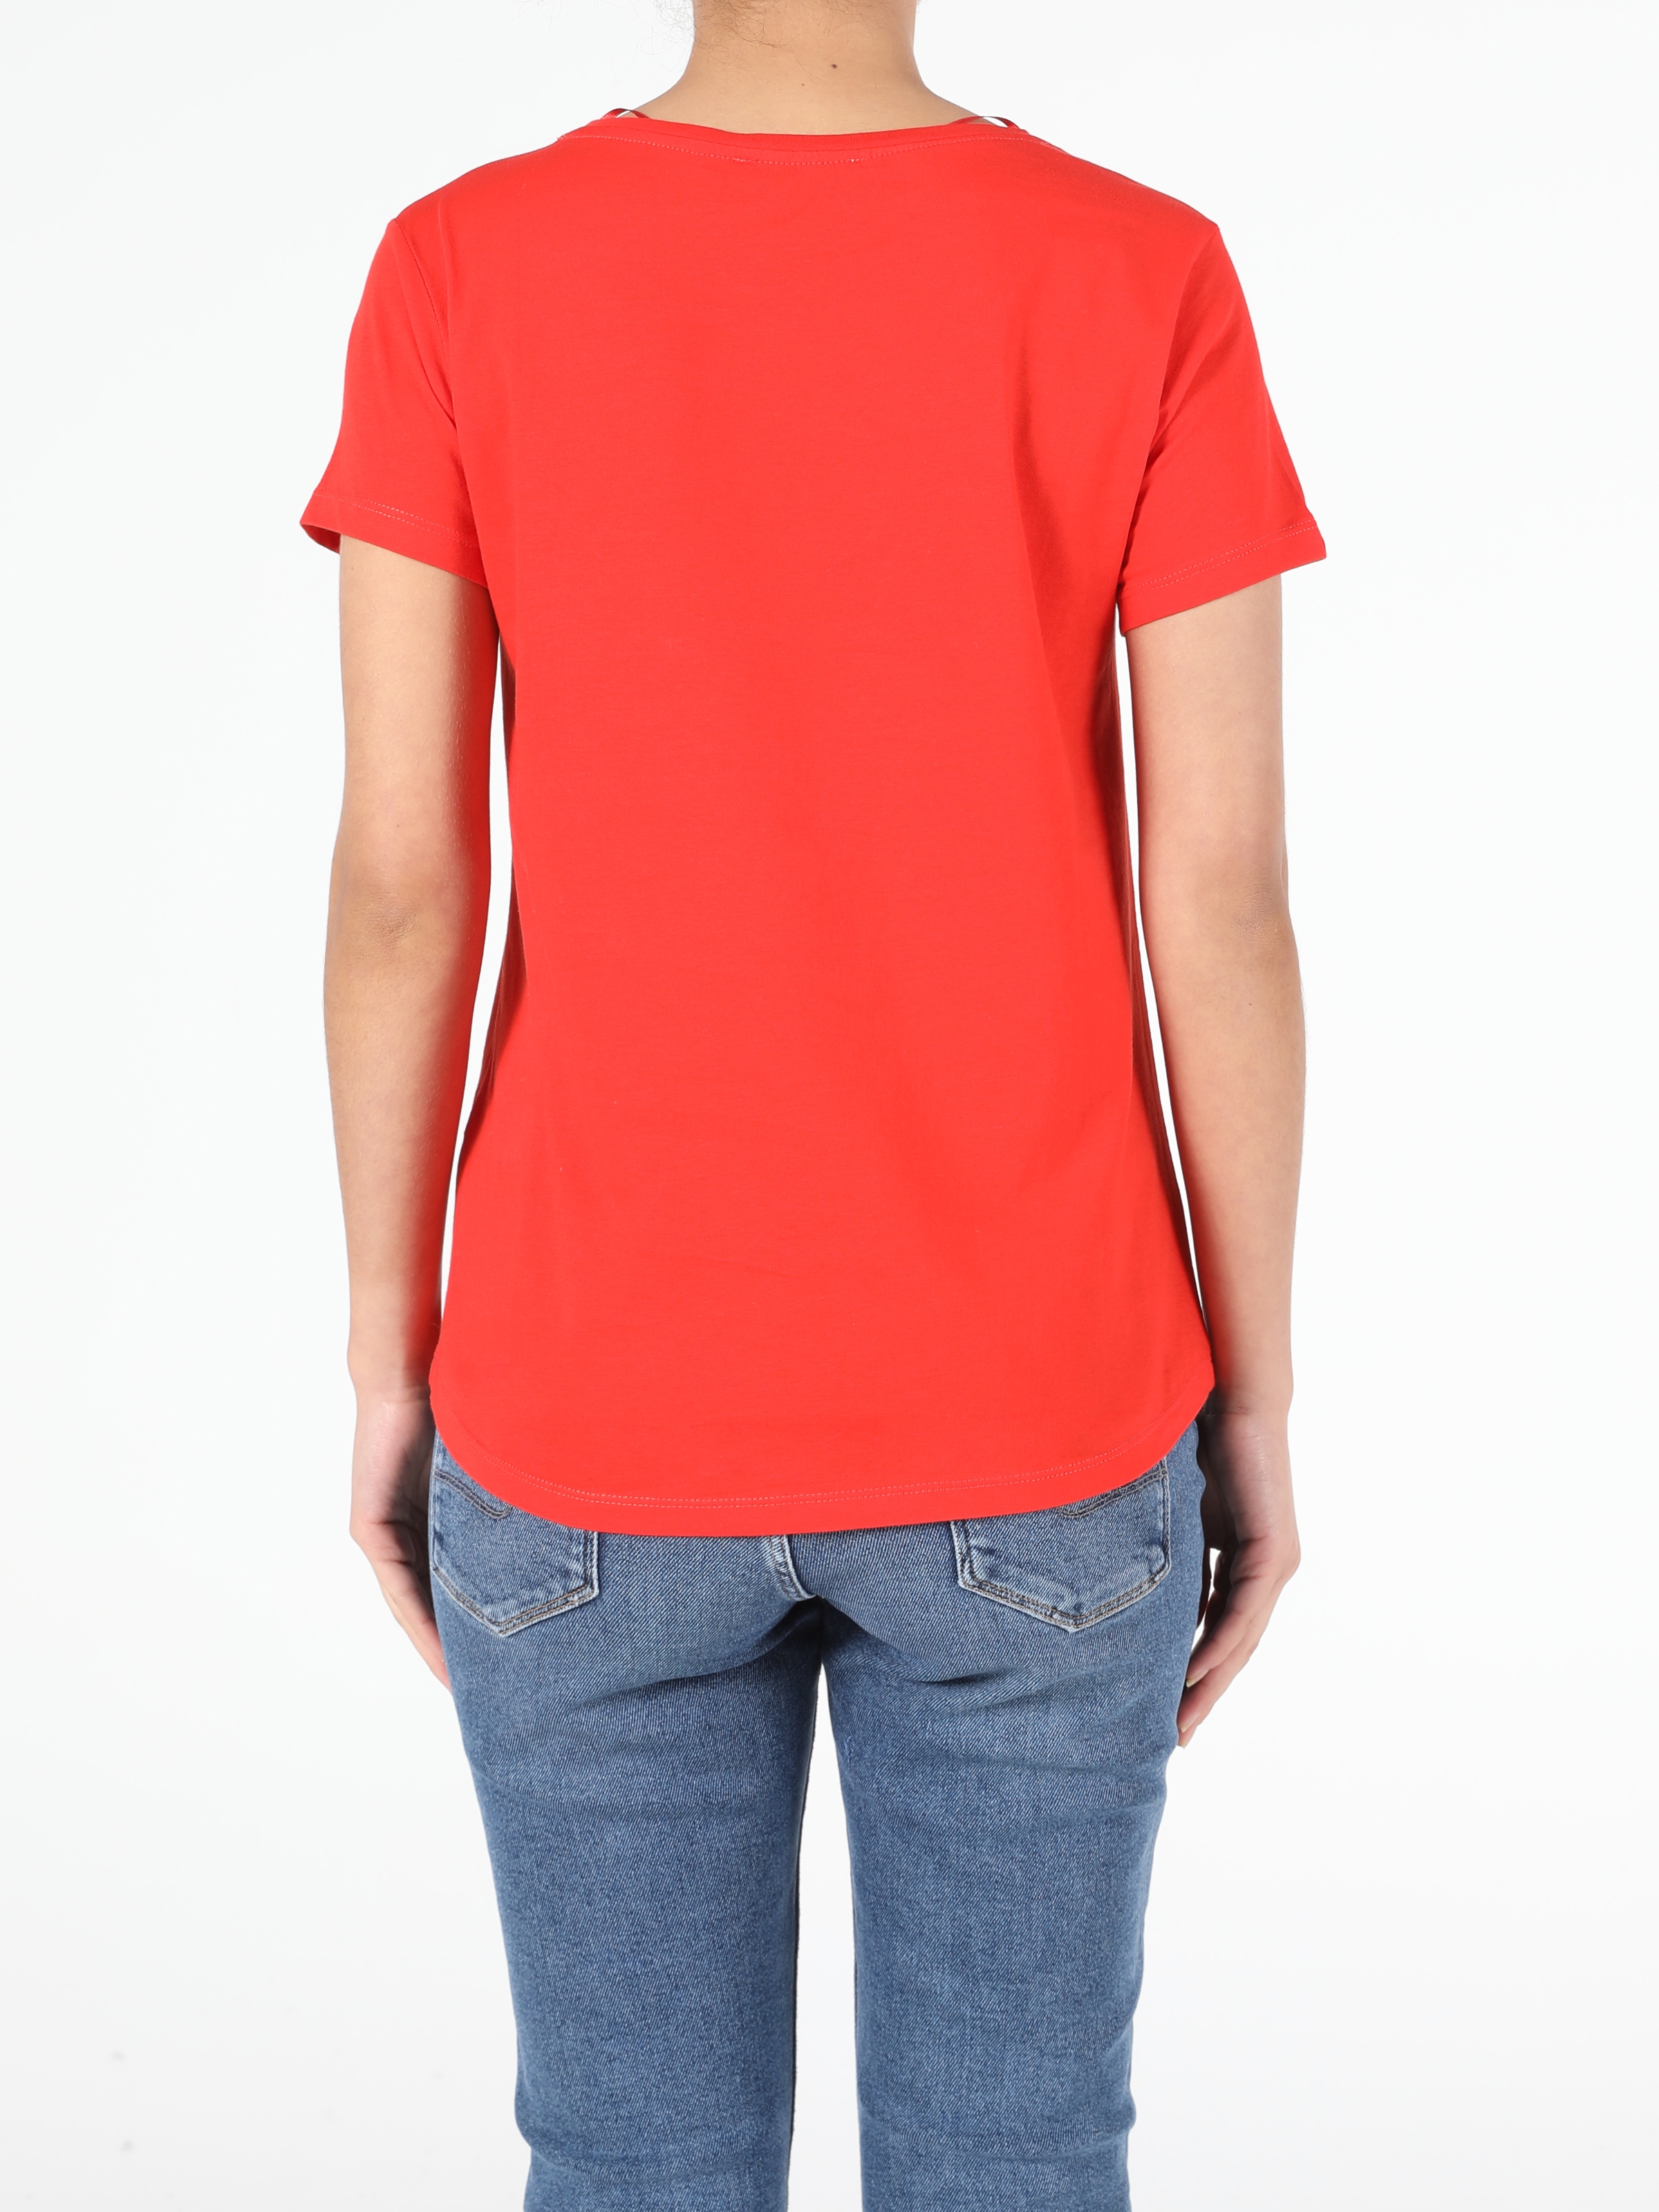 Colins Red Woman Short Sleeve Tshirt. 2